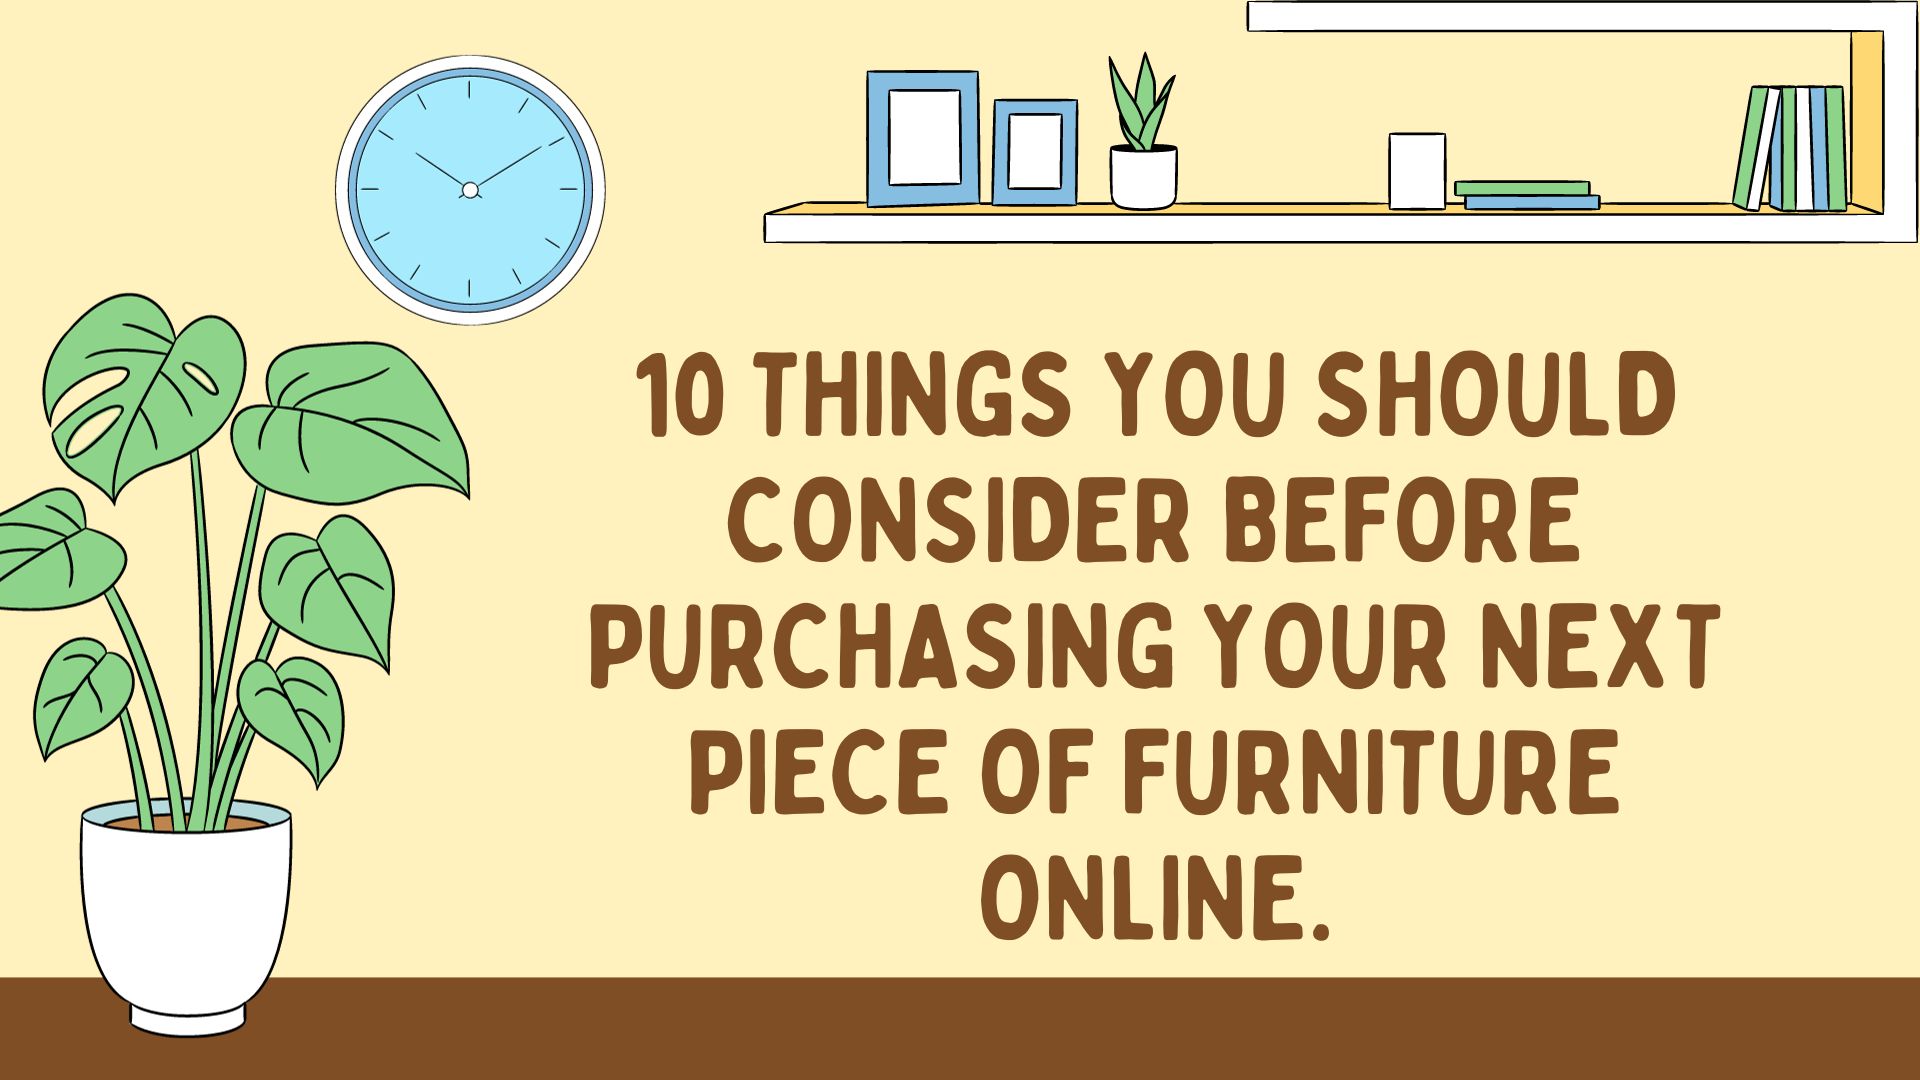 10 Things You Should Consider Before Purchasing Your Next Piece of Furniture Online.